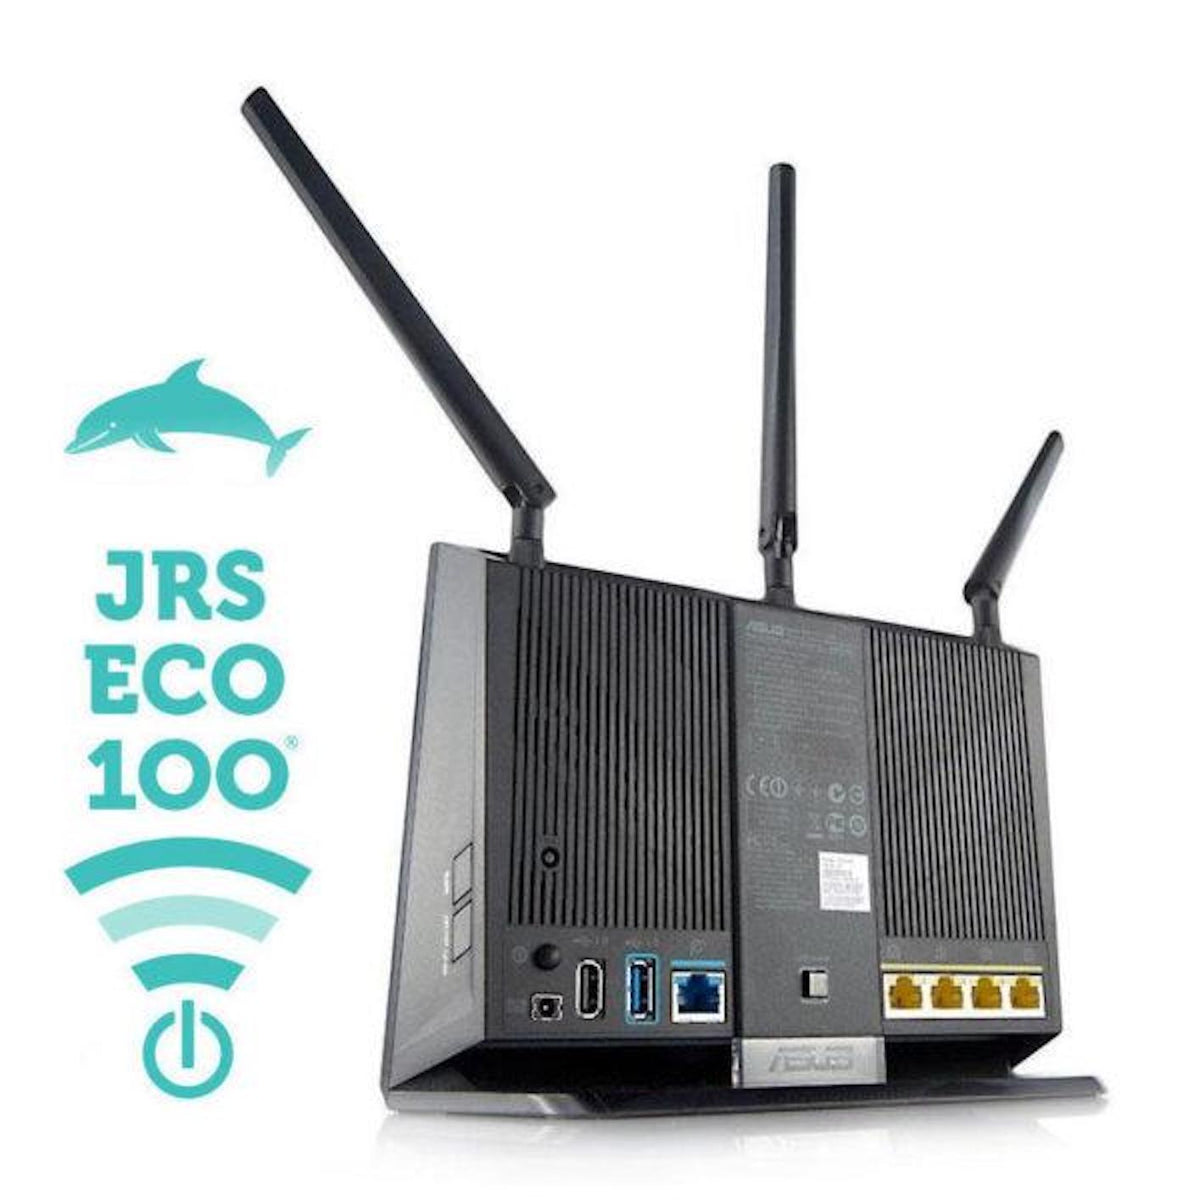 JRS Eco 100 D2 On-Demand Wifi Router